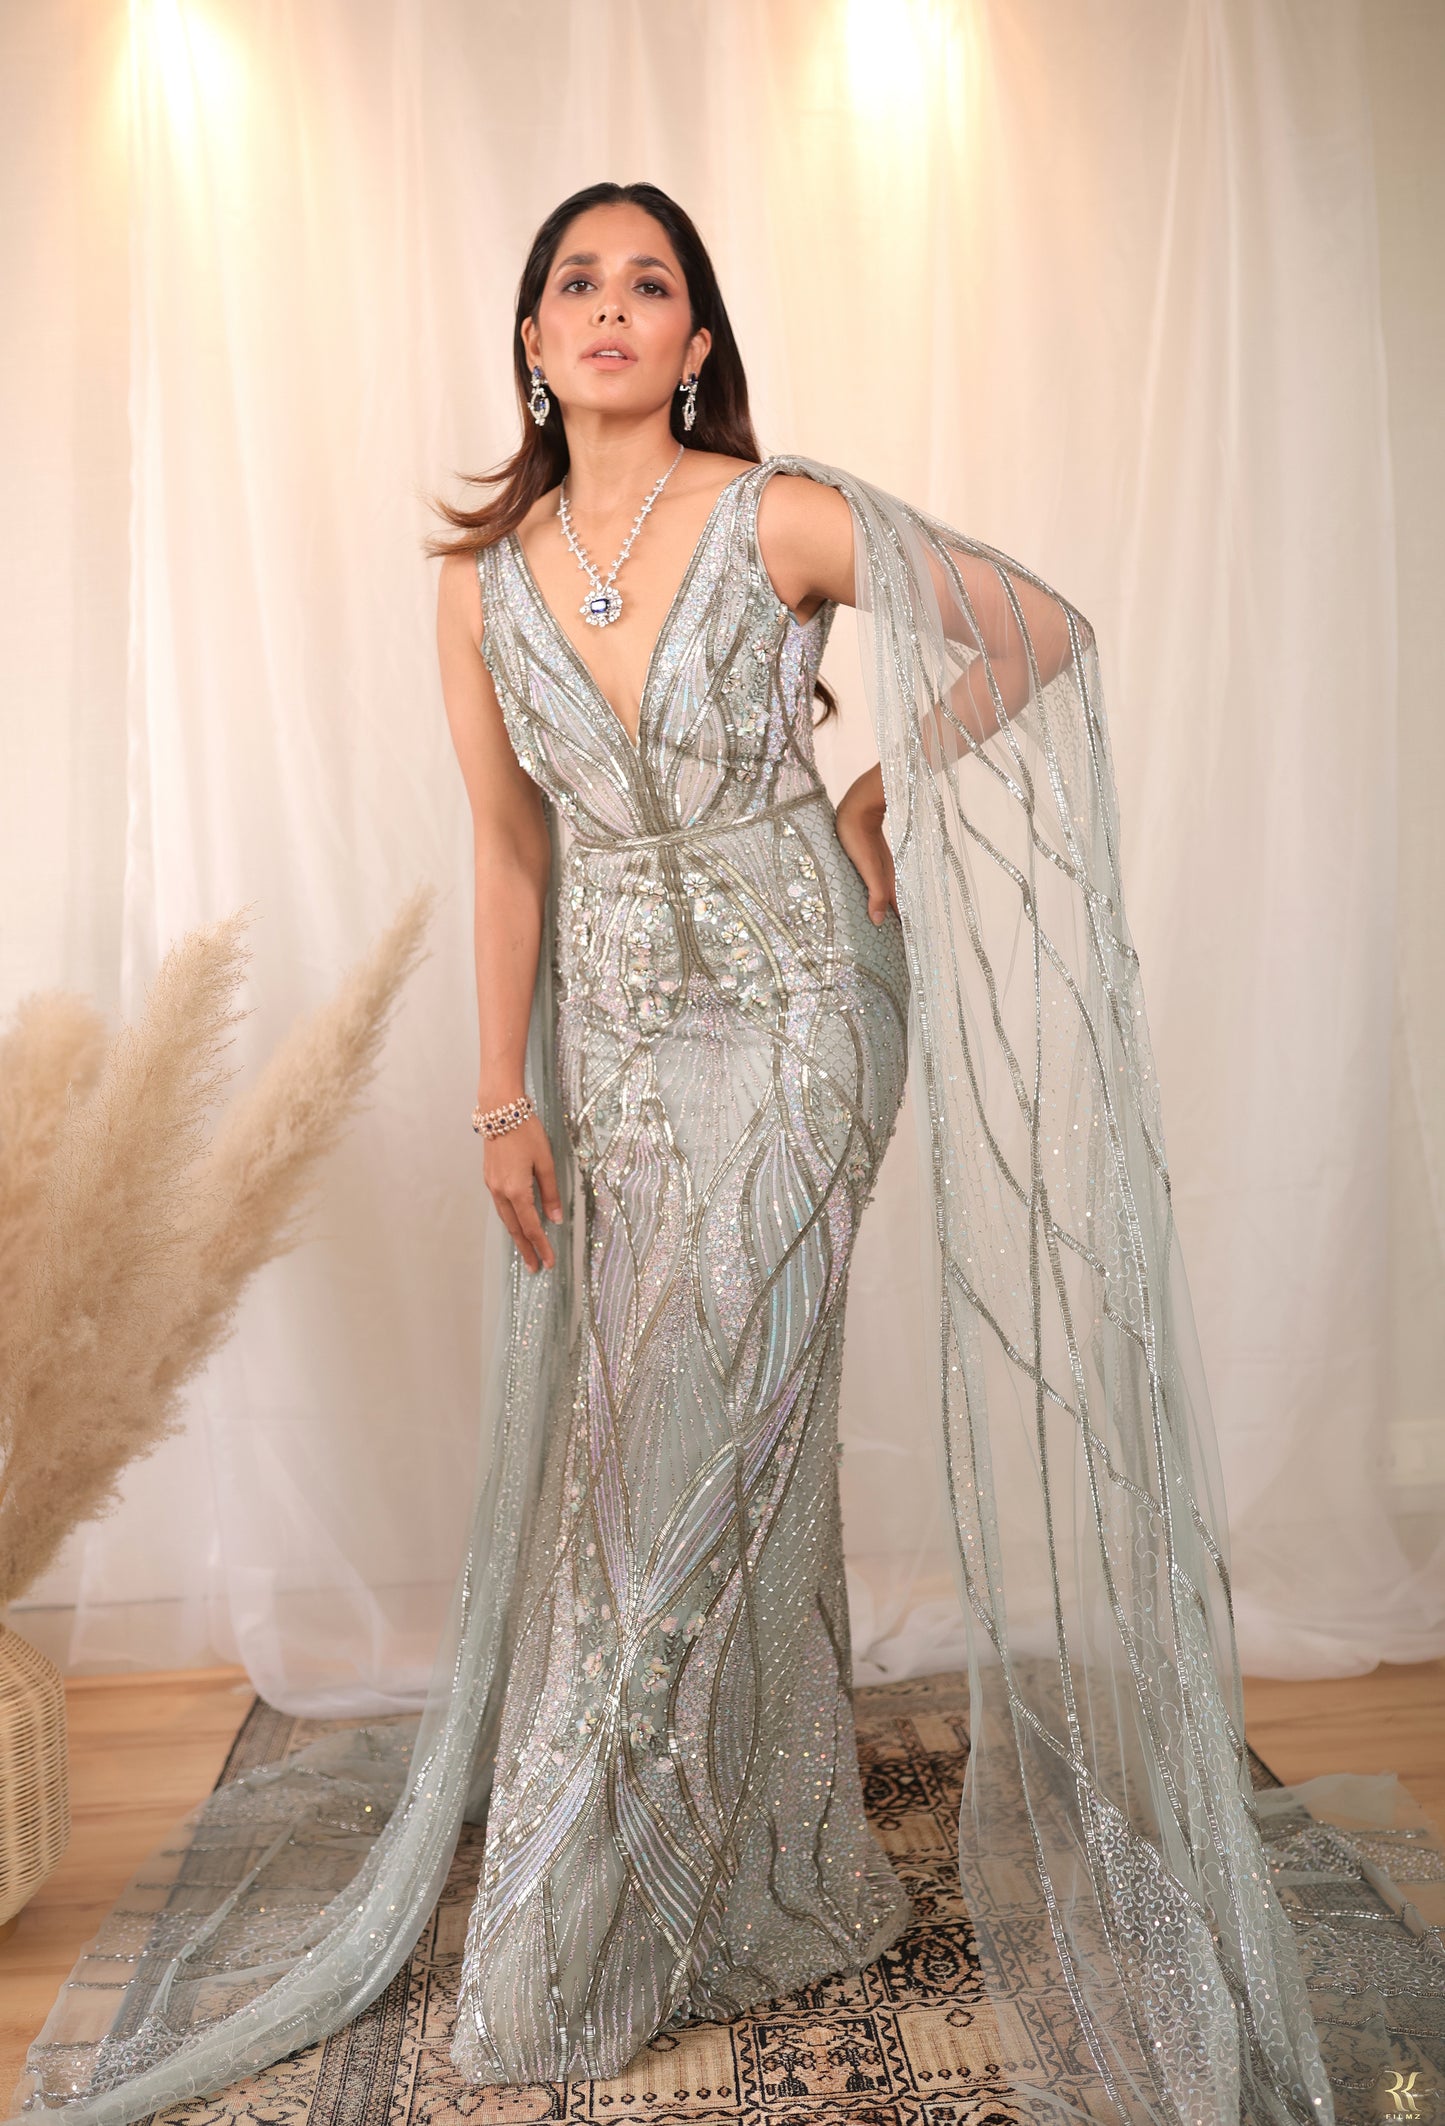 HOUSE OF MISU IN POWDER BLUE GOWN WITH WINGS